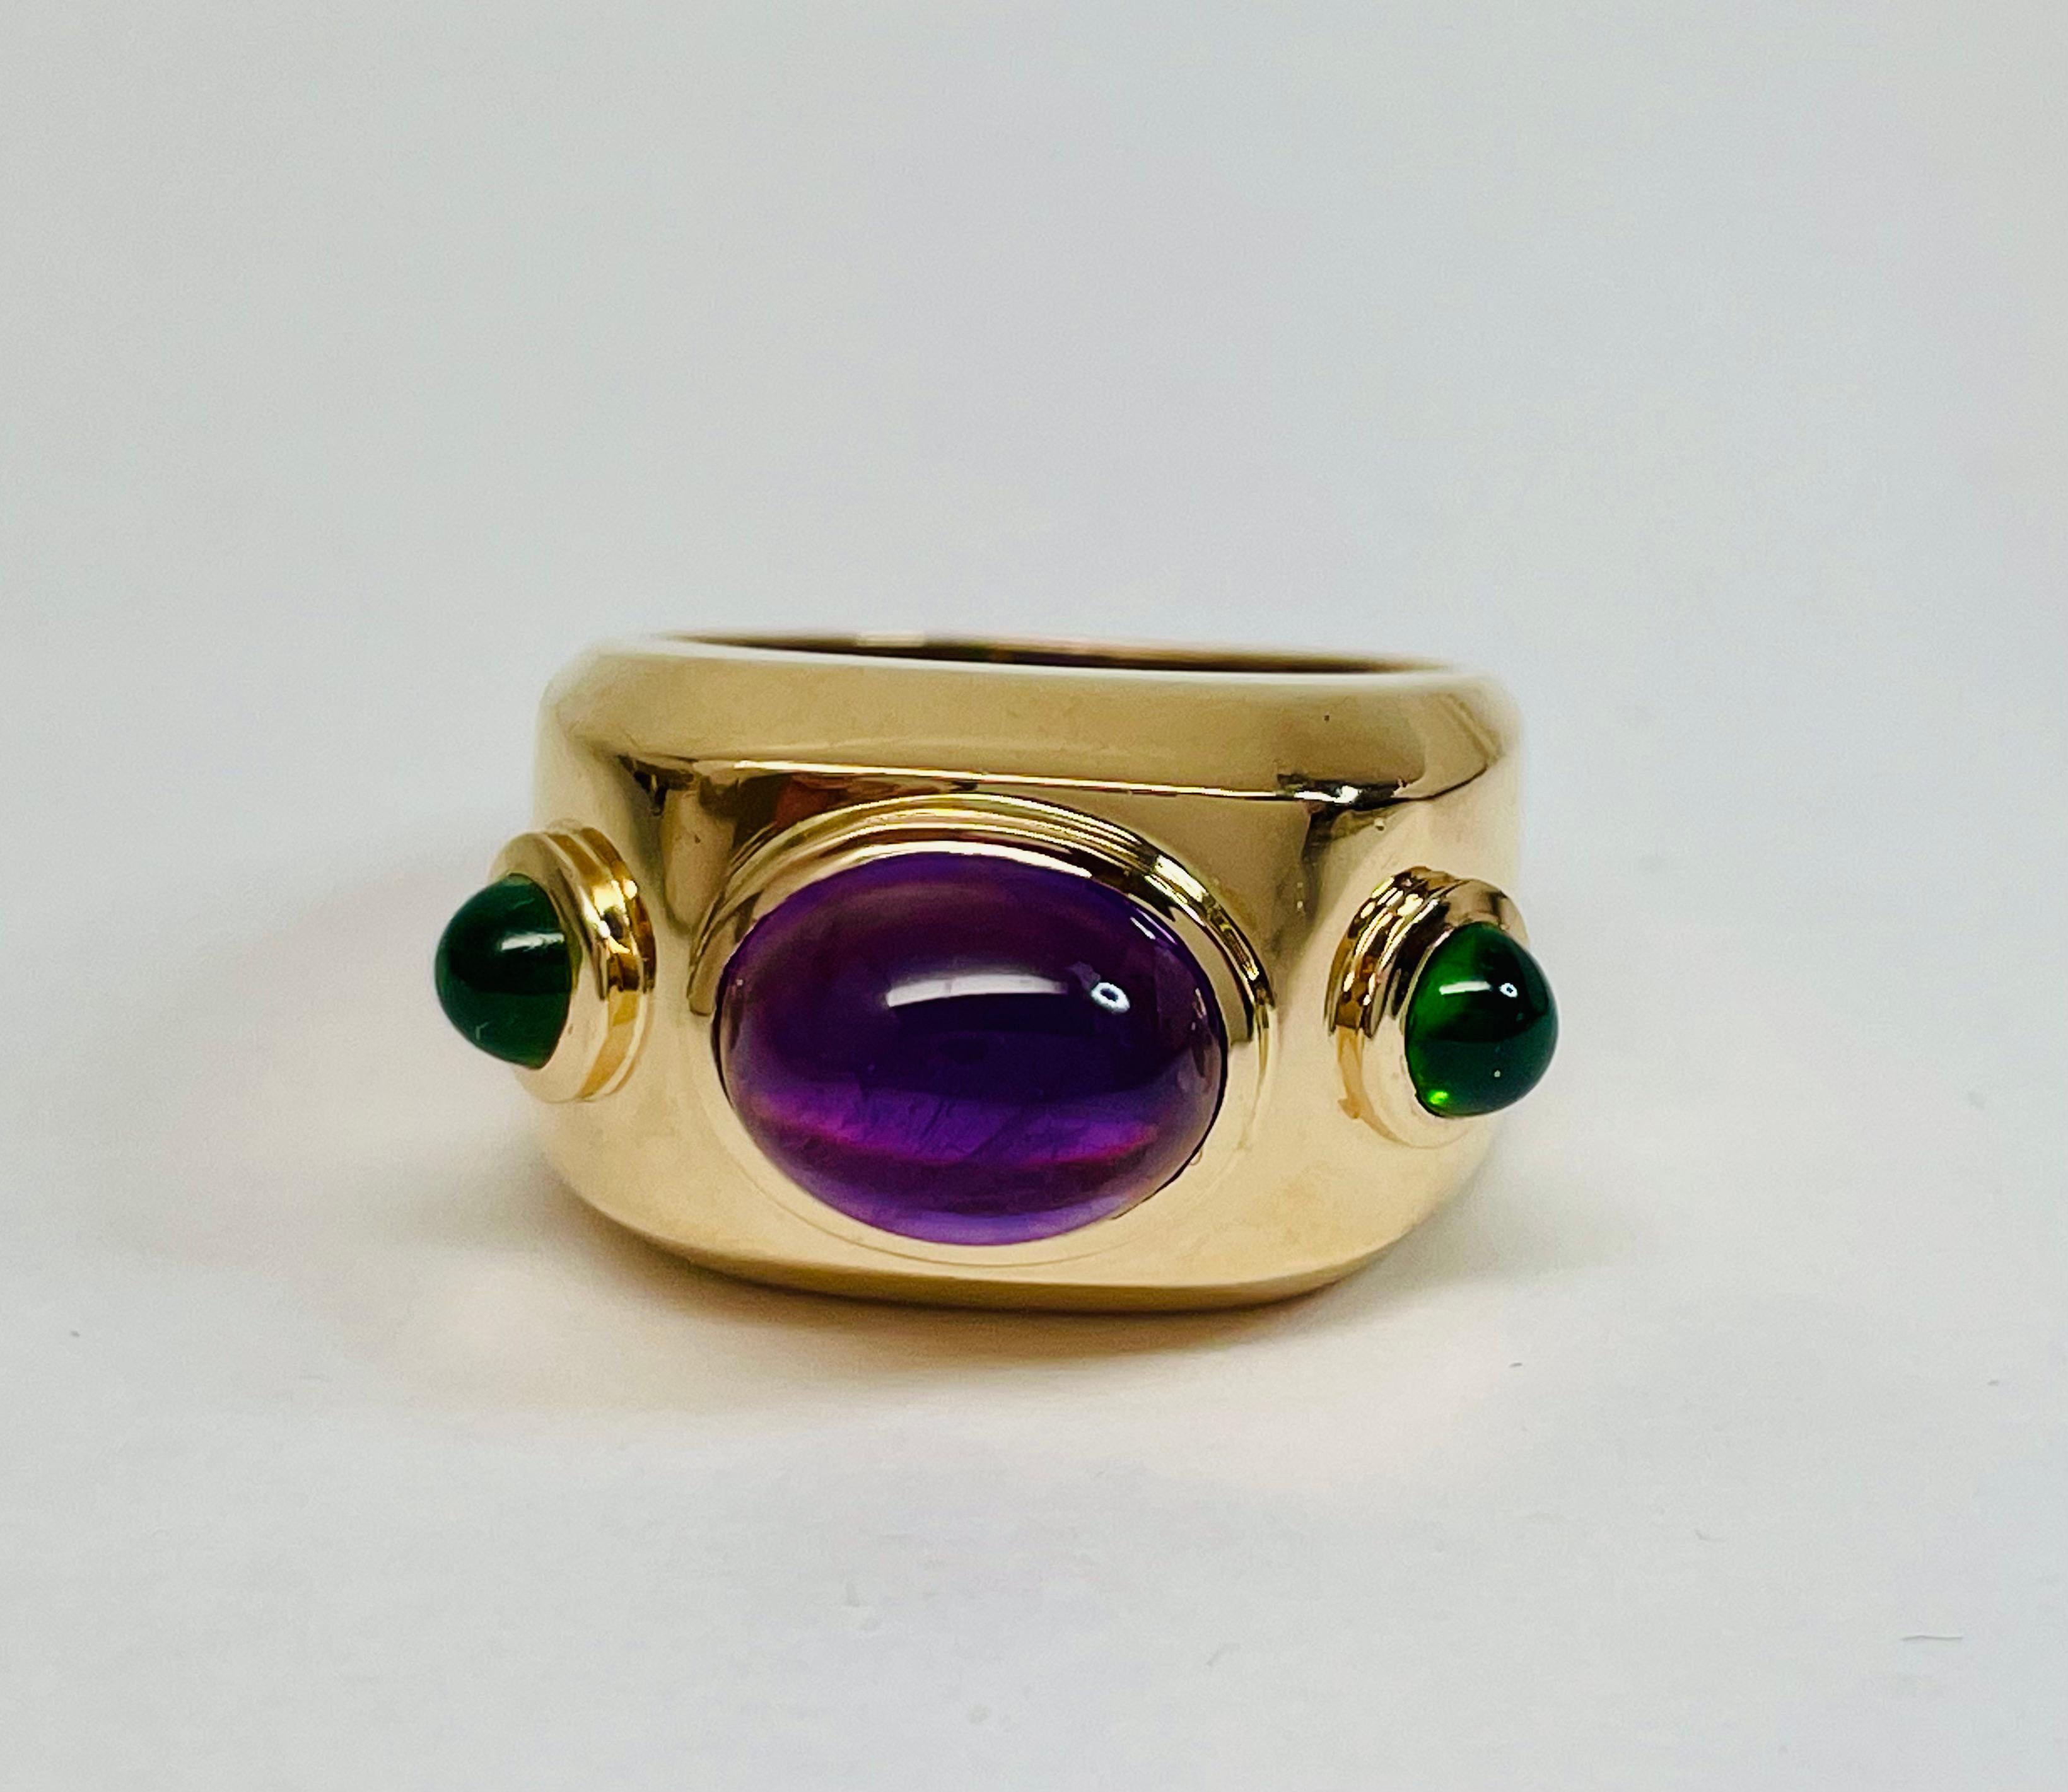 Marcy Feldman for HEARTWEAR DESIGNS created this large heavy dome ring of 14kt. Yellow Gold bezel- set with a 3.5 ct. Cabochon Cut Amethyst. It measures 10 x 8 mm. On each side set in bezels are two bright green  Cabochon Cut Chrome Diopside. These